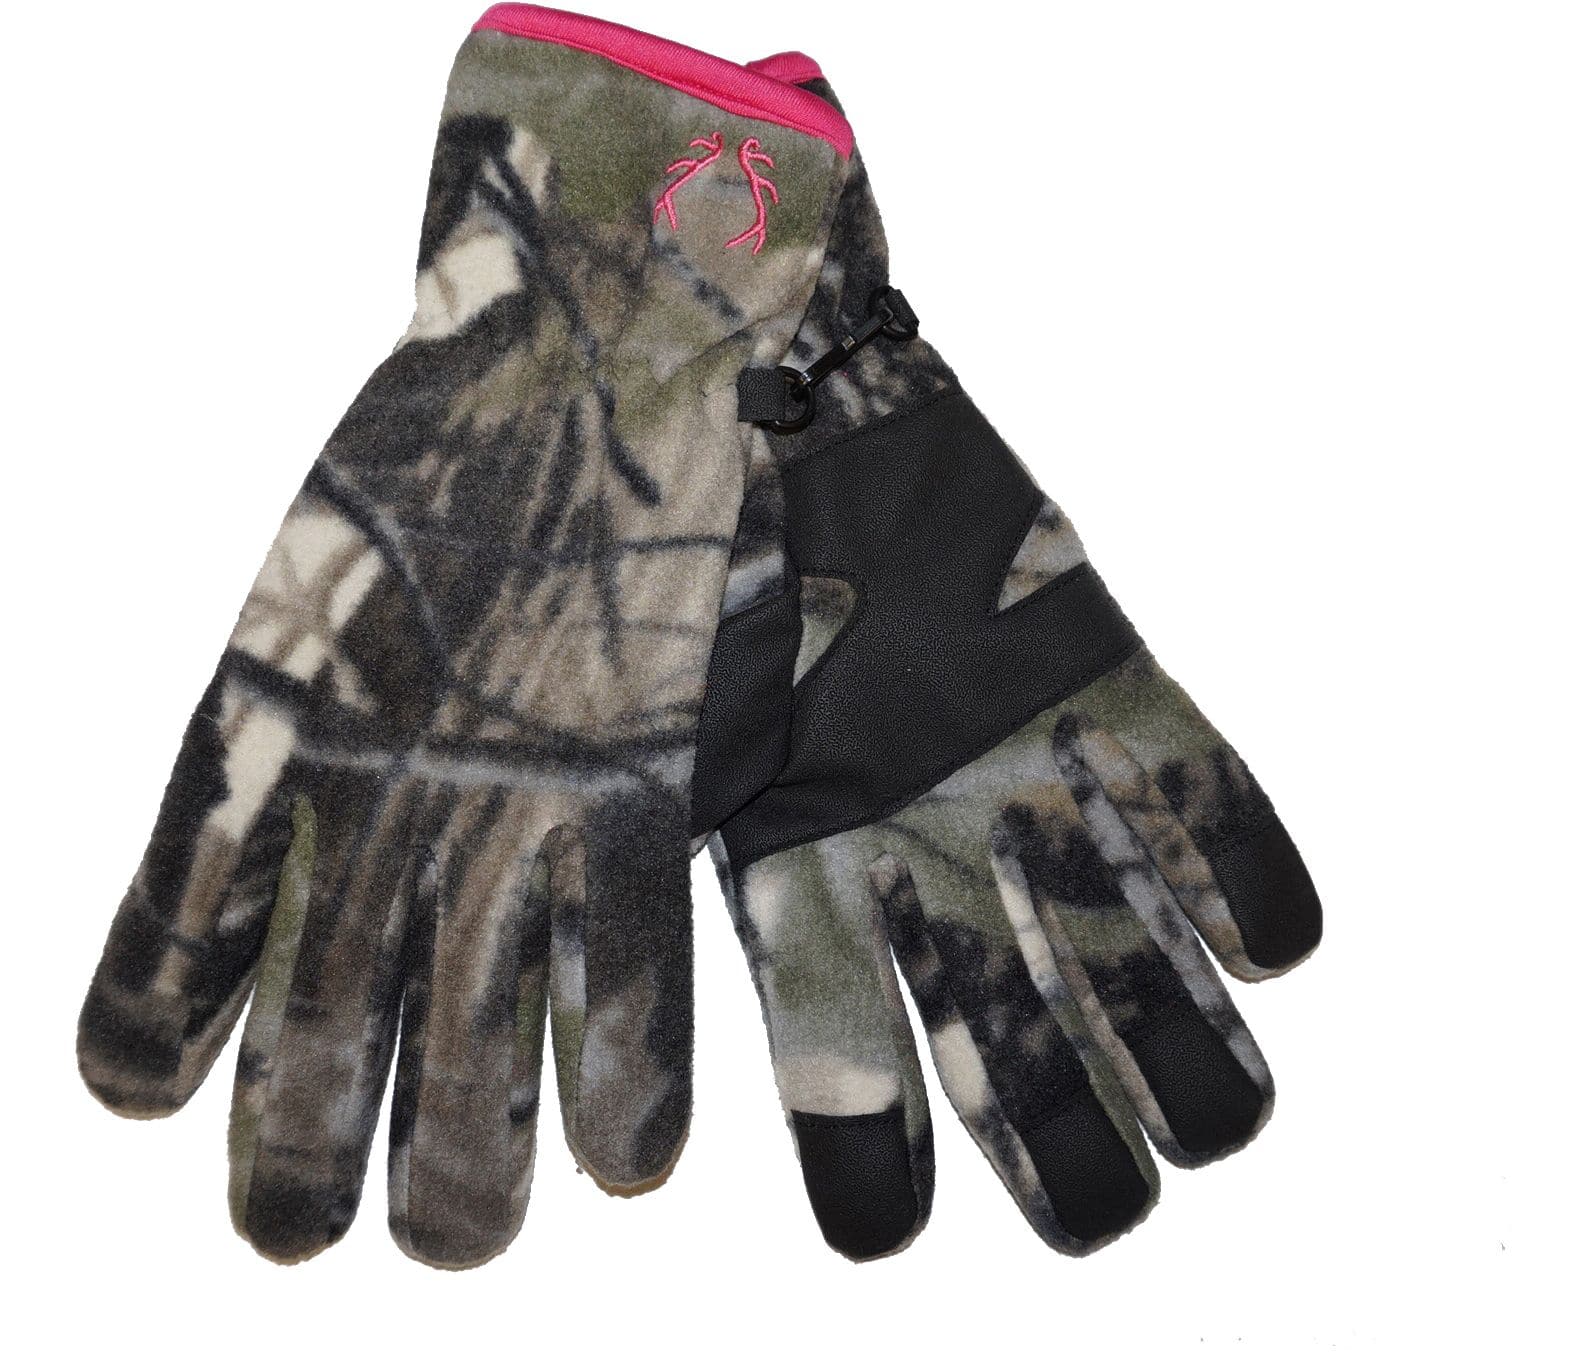 Hot Shot Women's Warm Insulated Fleece Hunting Gloves with Non-Slip Palm,  Camo/Pink